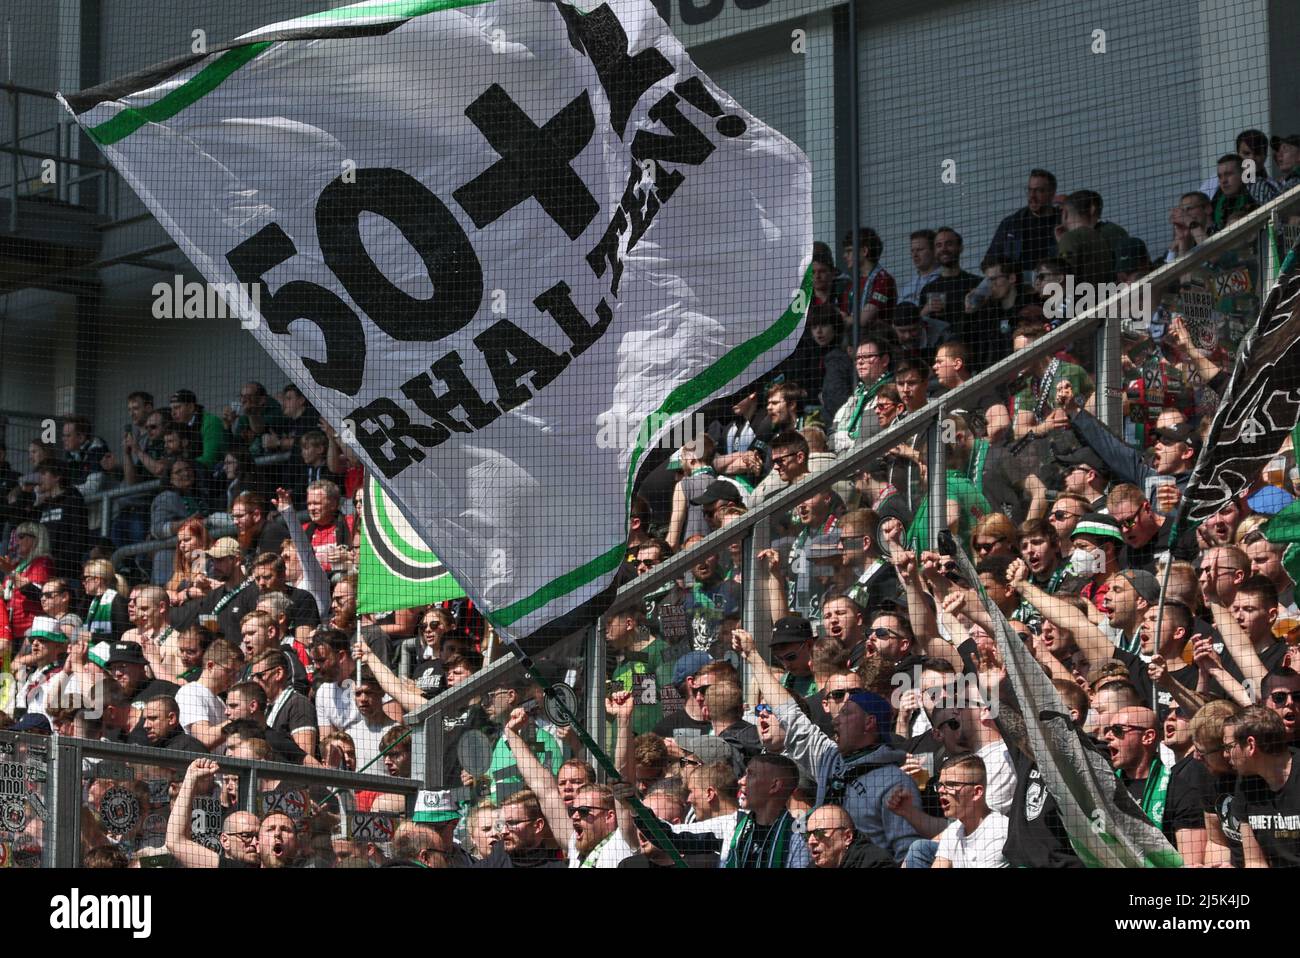 Paderborn, Germany. 24th Apr, 2022. Soccer: 2nd Bundesliga, SC Paderborn 07 - Hannover 96, Matchday 31 at Benteler Arena. 'Keep 50 1' is written on a banner of the fans from Hannover. Credit: Friso Gentsch/dpa - IMPORTANT NOTE: In accordance with the requirements of the DFL Deutsche Fußball Liga and the DFB Deutscher Fußball-Bund, it is prohibited to use or have used photographs taken in the stadium and/or of the match in the form of sequence pictures and/or video-like photo series./dpa/Alamy Live News Stock Photo